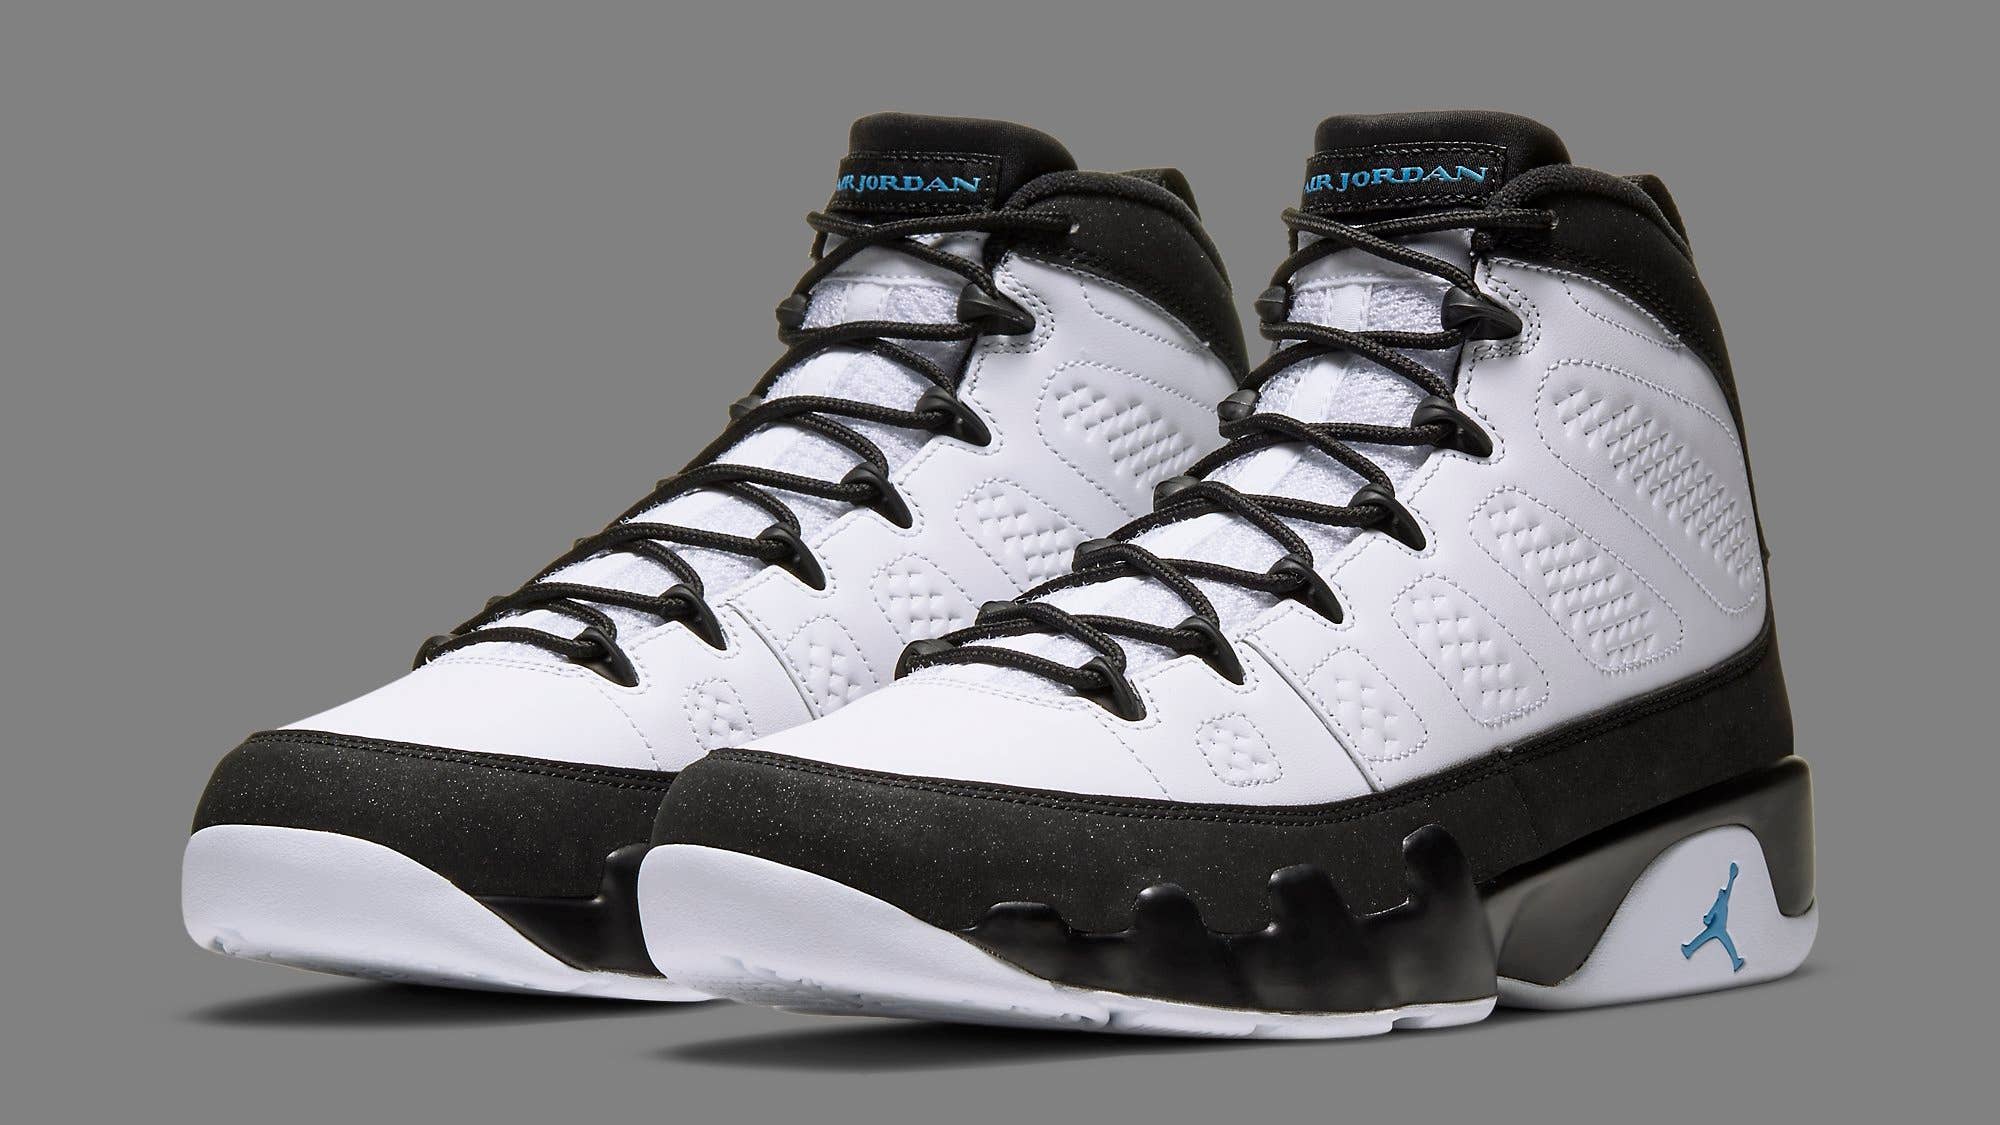 misil circuito Cambiable Best Look Yet at the 'University Blue' Air Jordan 9 | Complex